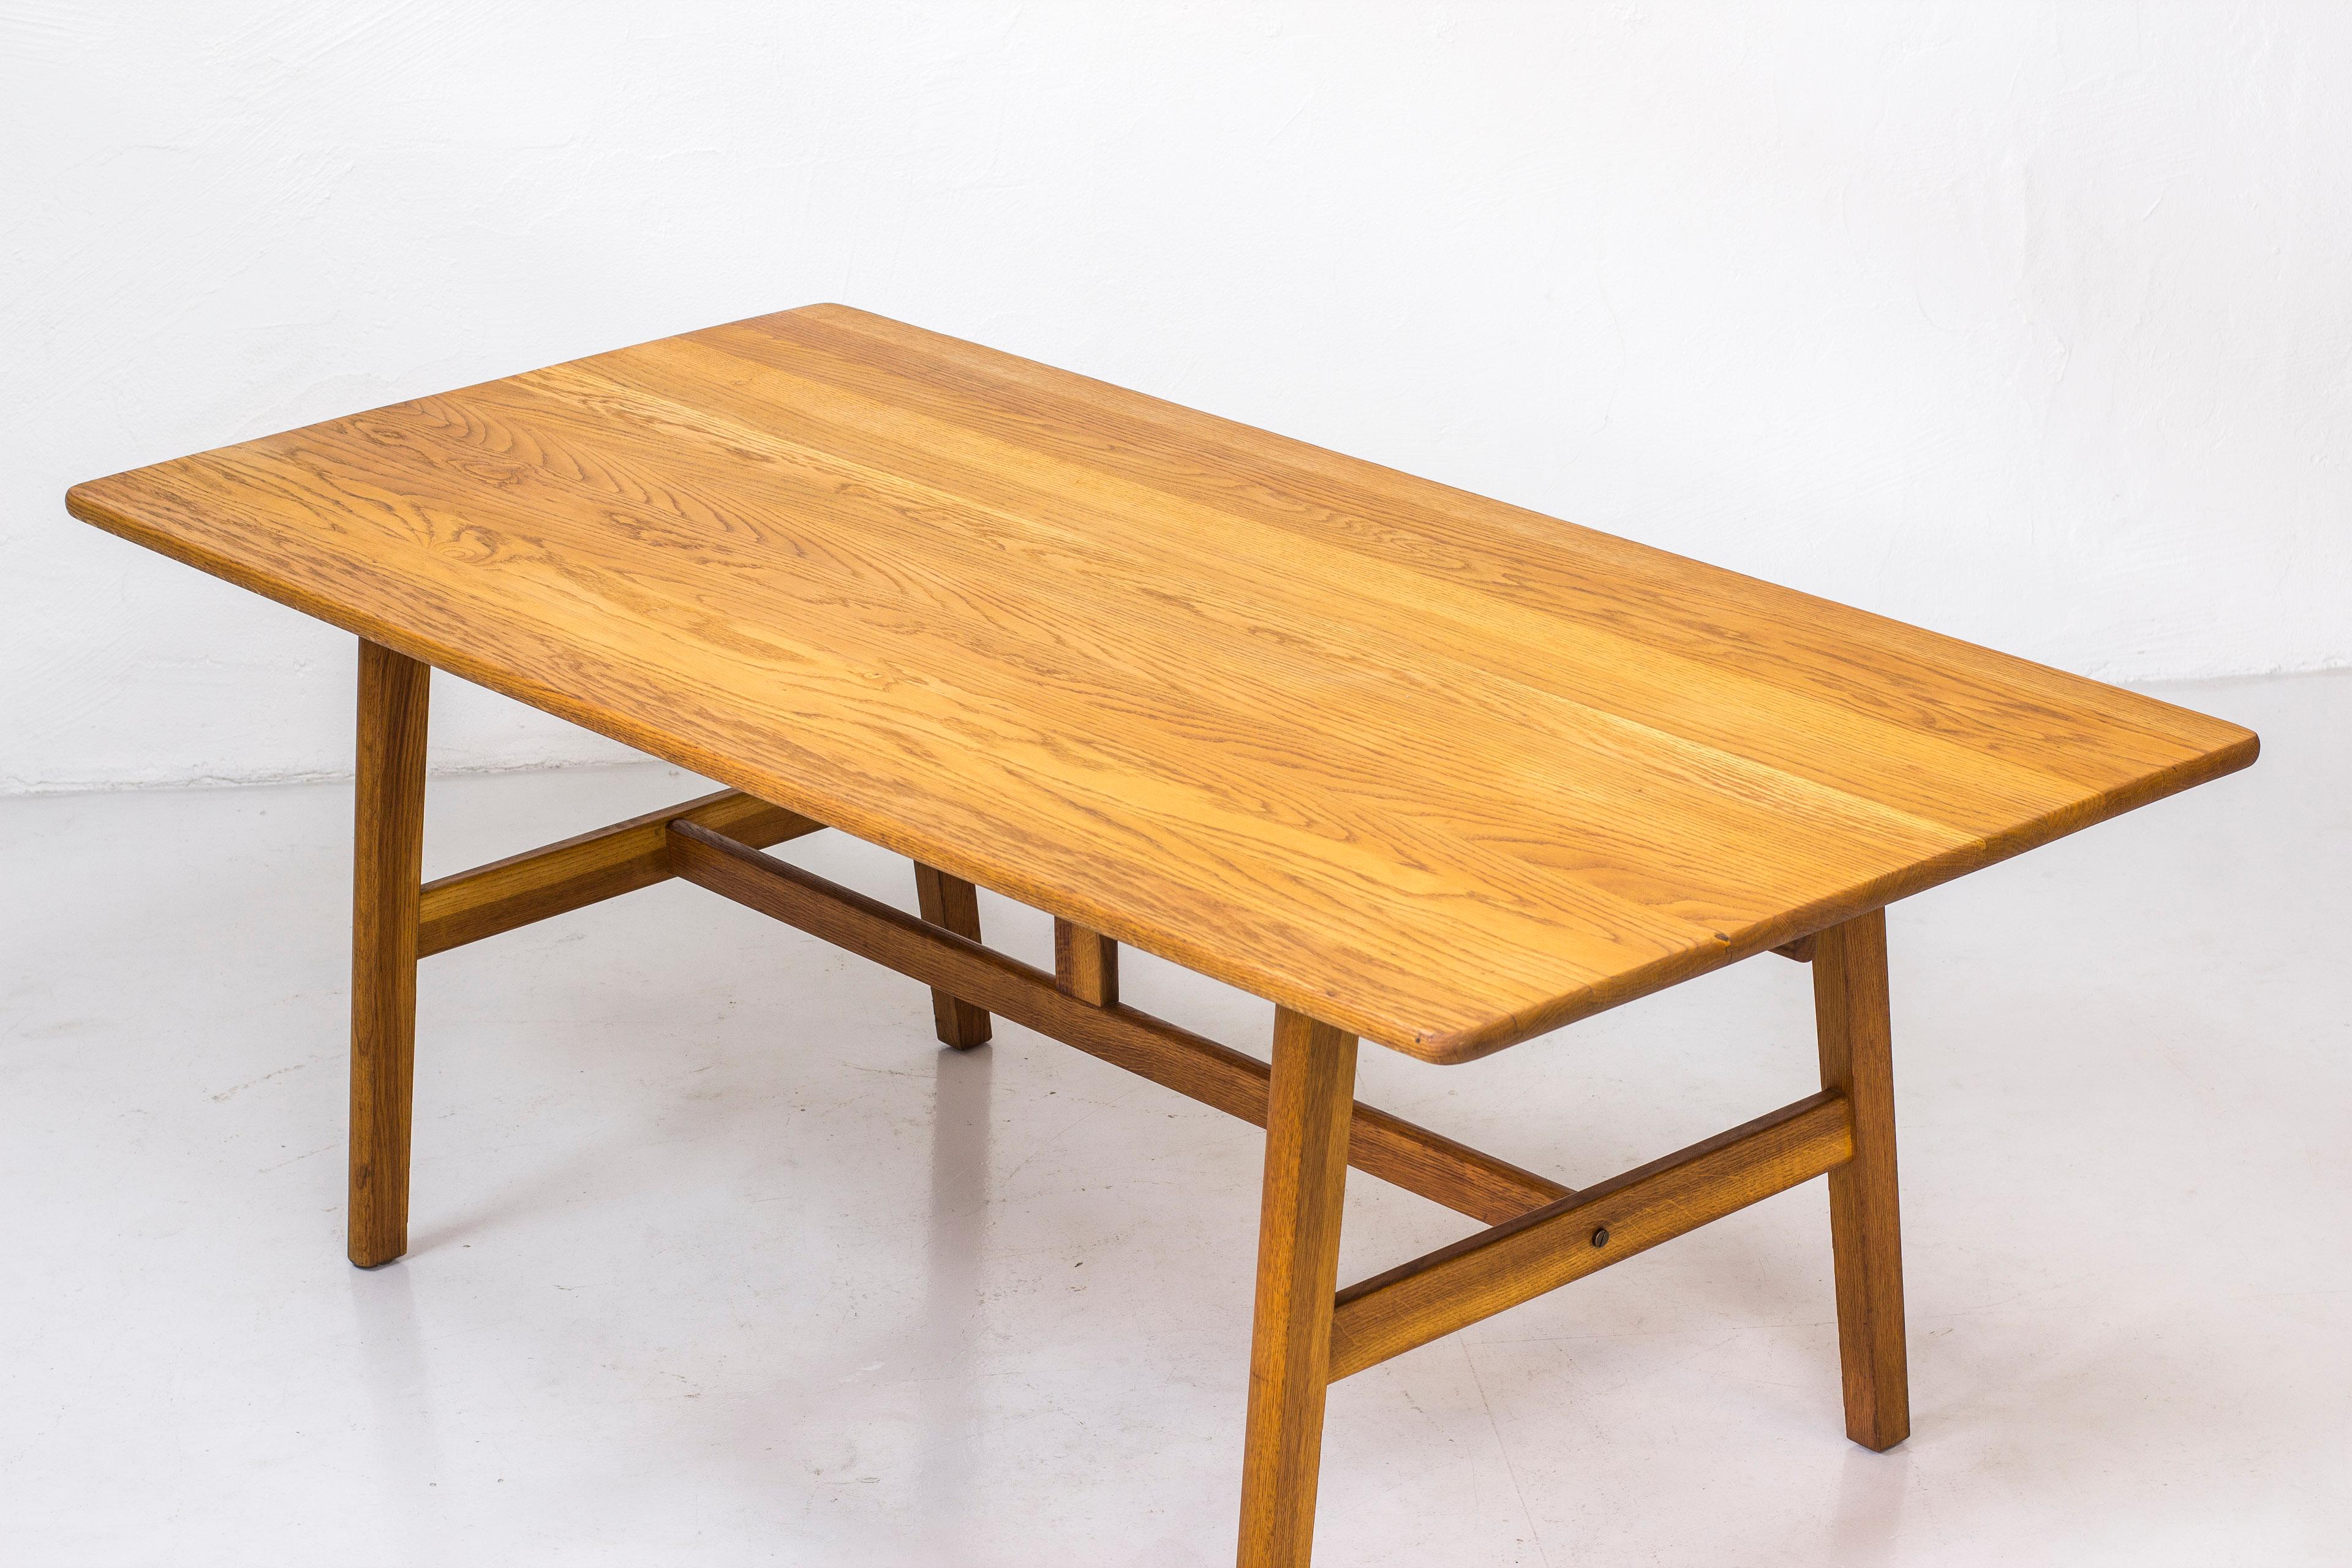 Table by John Vedel Rieper. Produced in Denmark by cabinet maker Erhard Rasmussen. Originally described by the designer as a work table. Ideal as a desk or dining table for six people. Made from solid oak throughout. Small brass screw detail in the